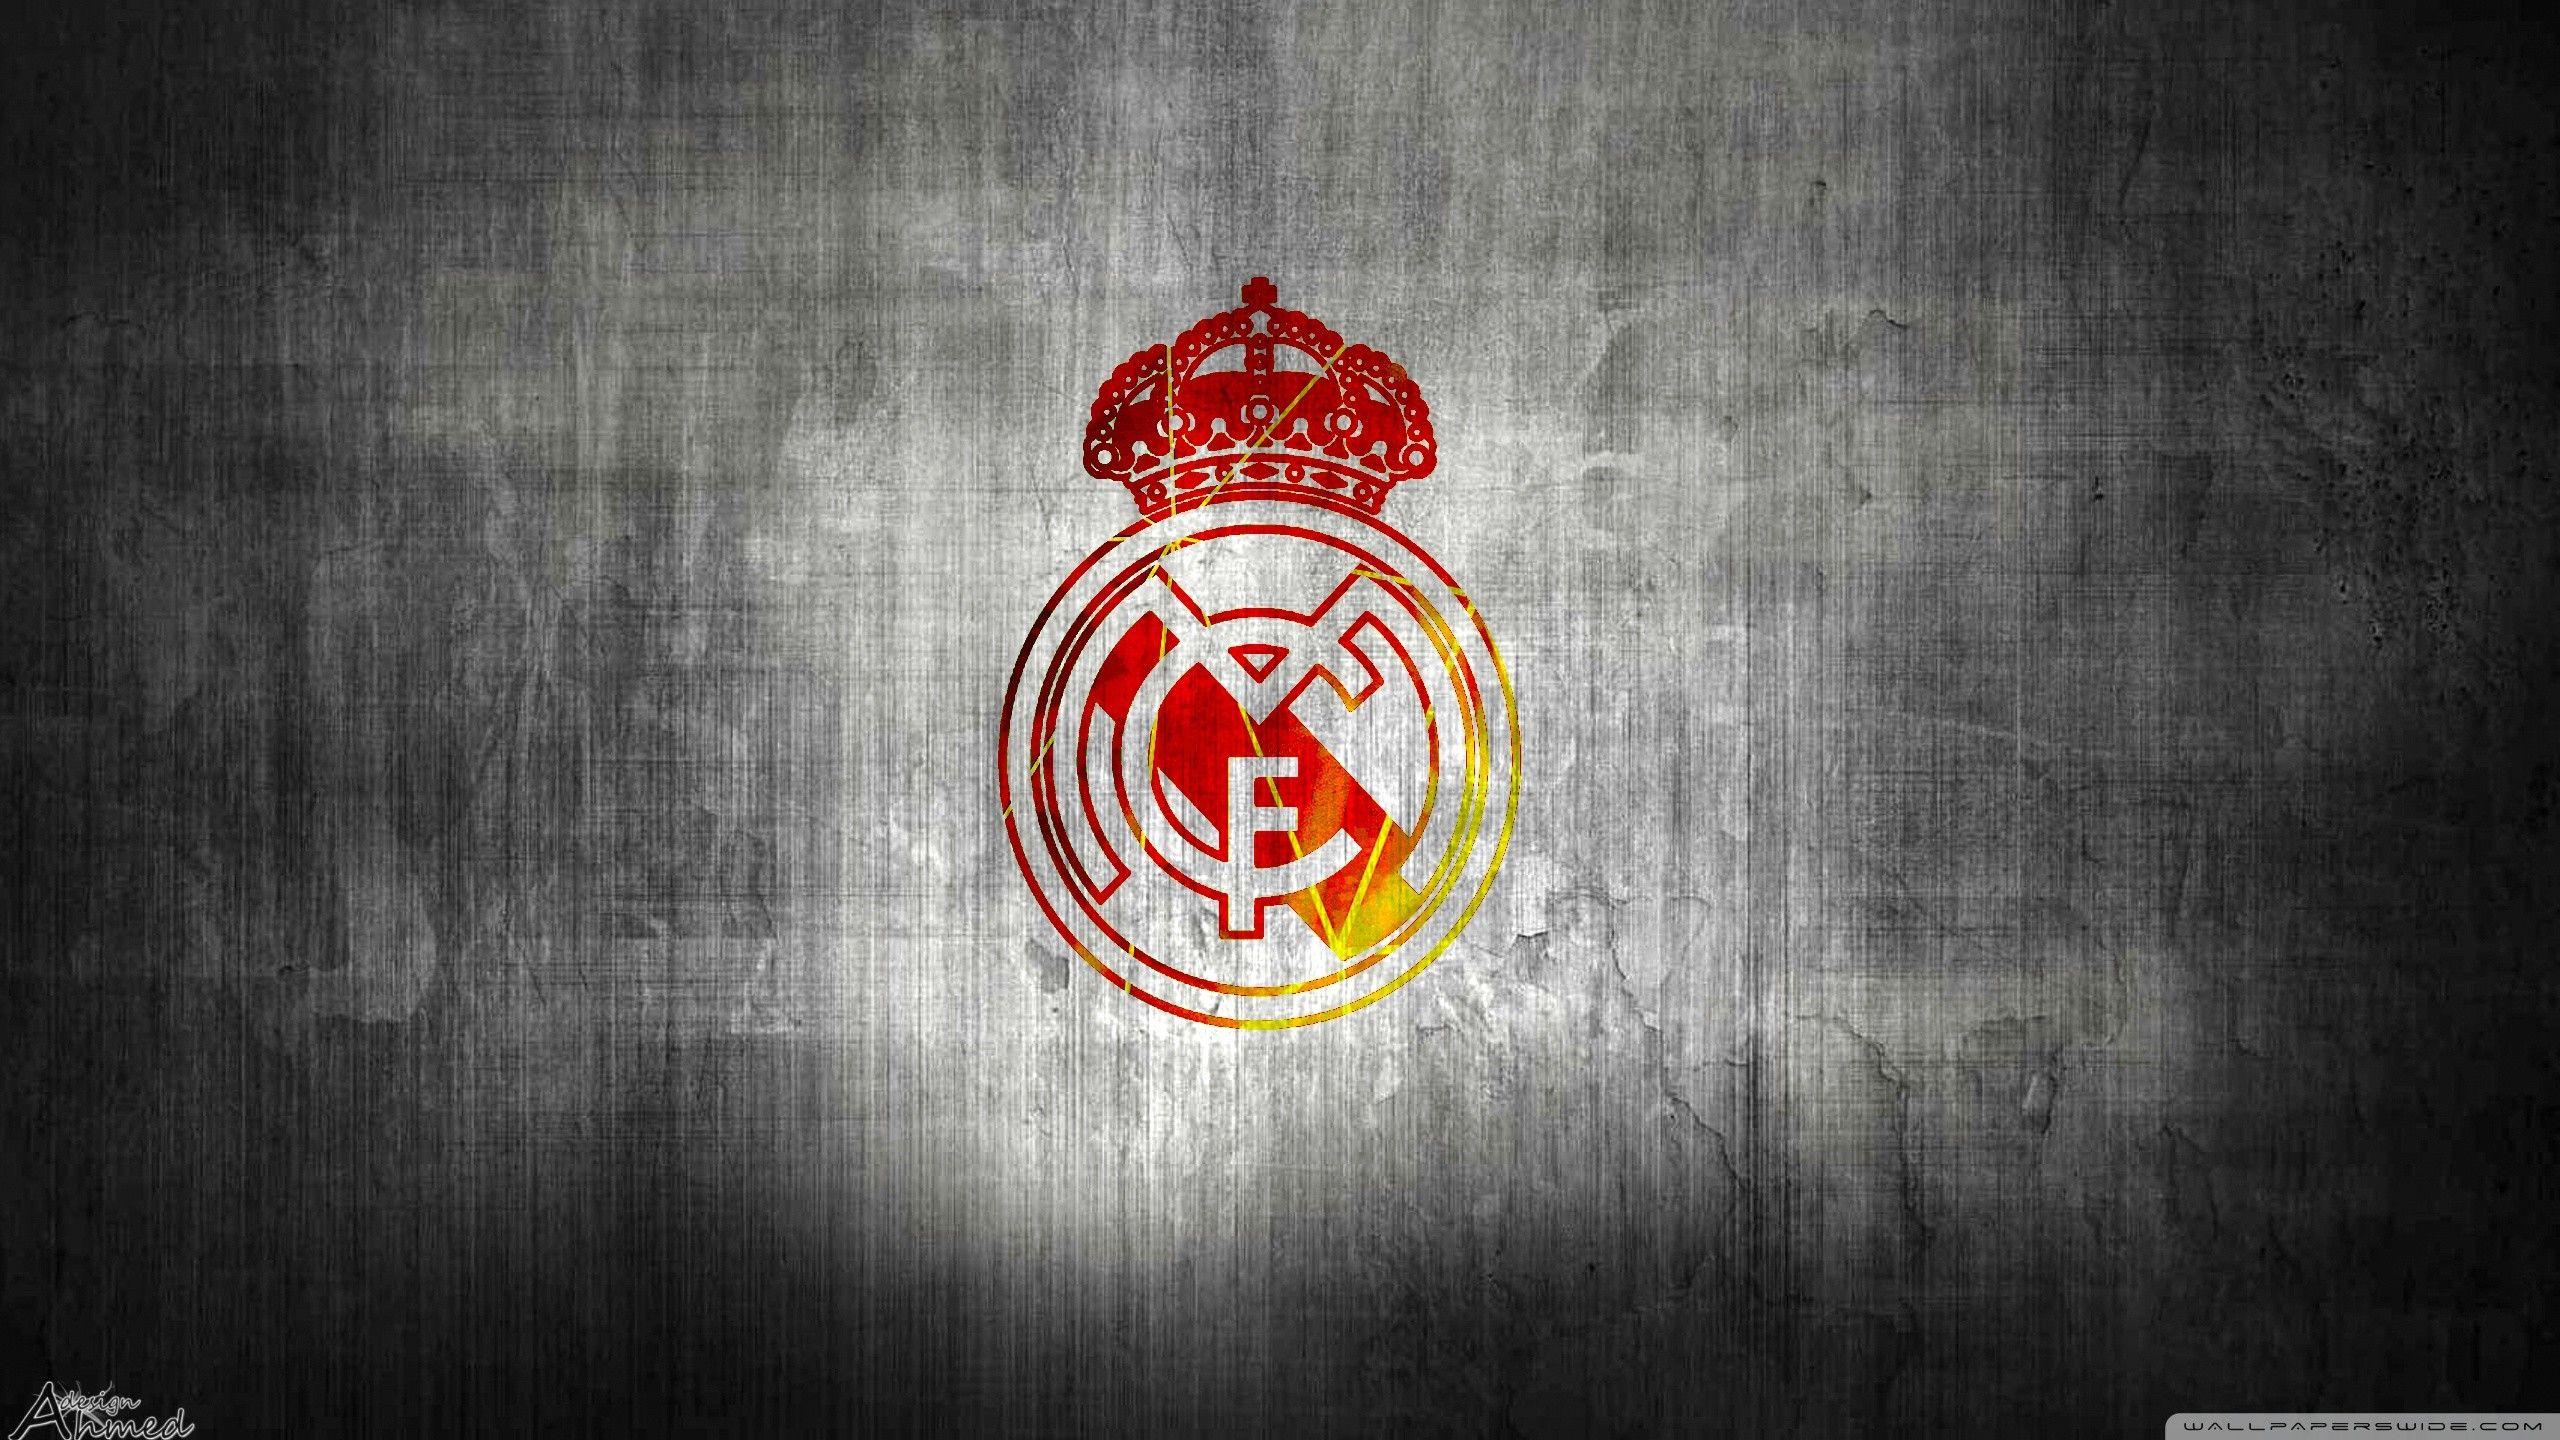  Real  Madrid  2021 Wallpapers  Wallpaper  Cave